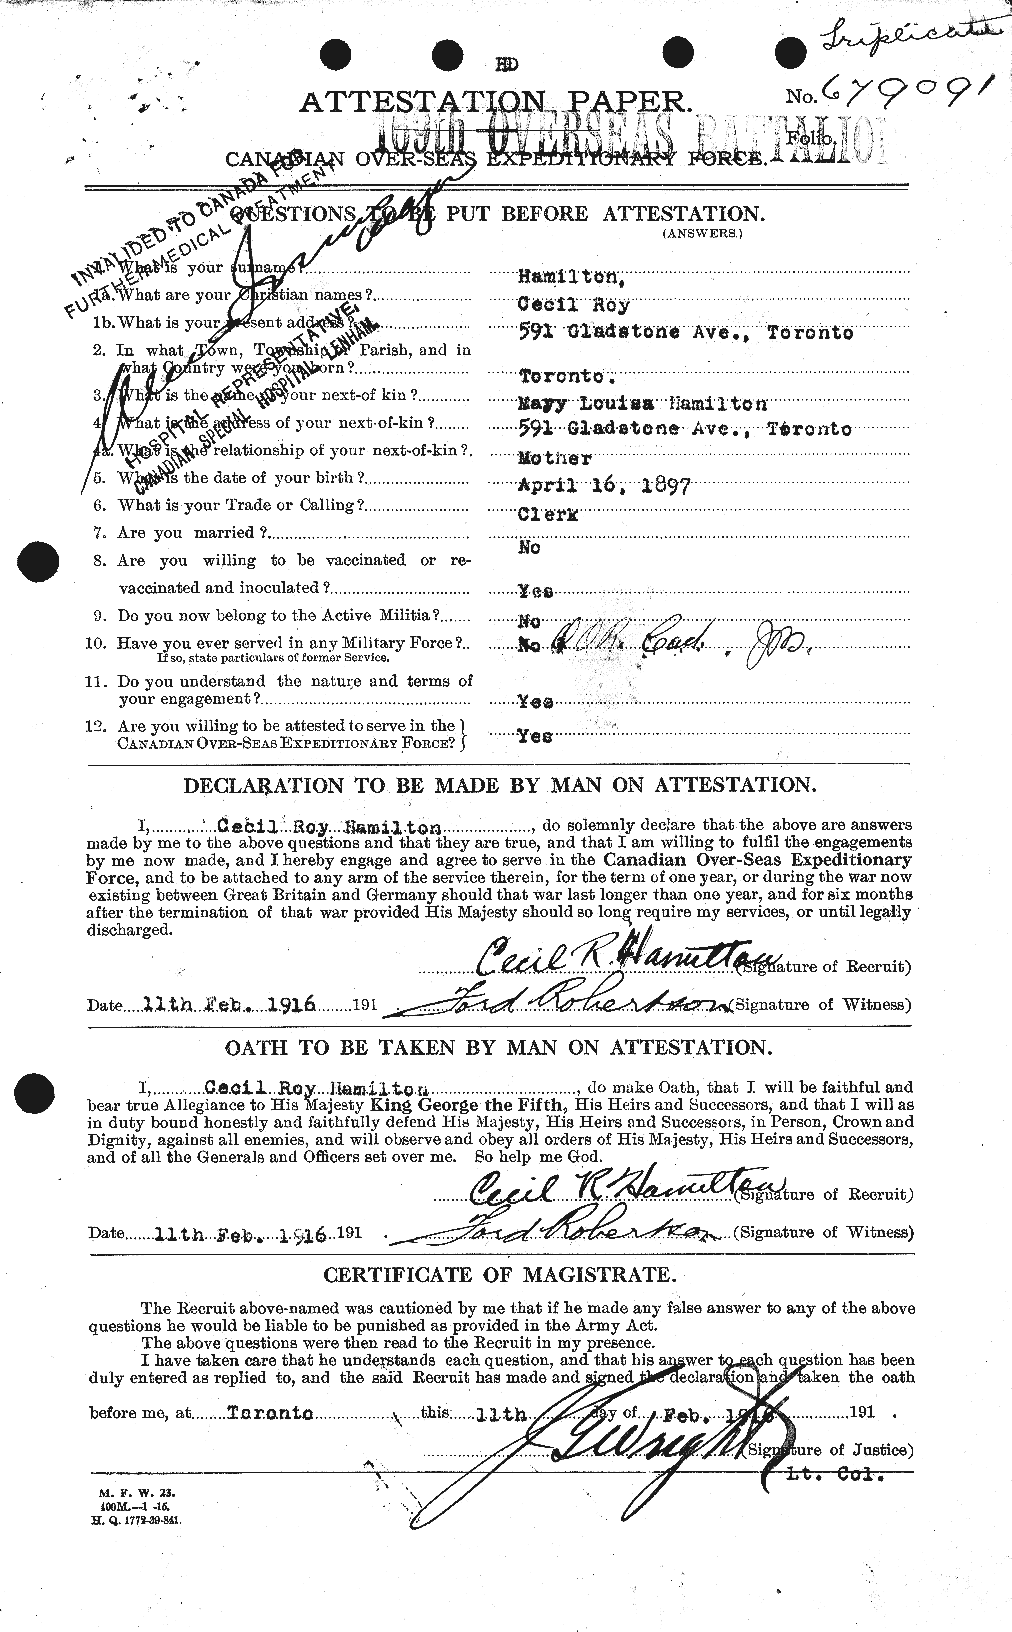 Personnel Records of the First World War - CEF 375290a